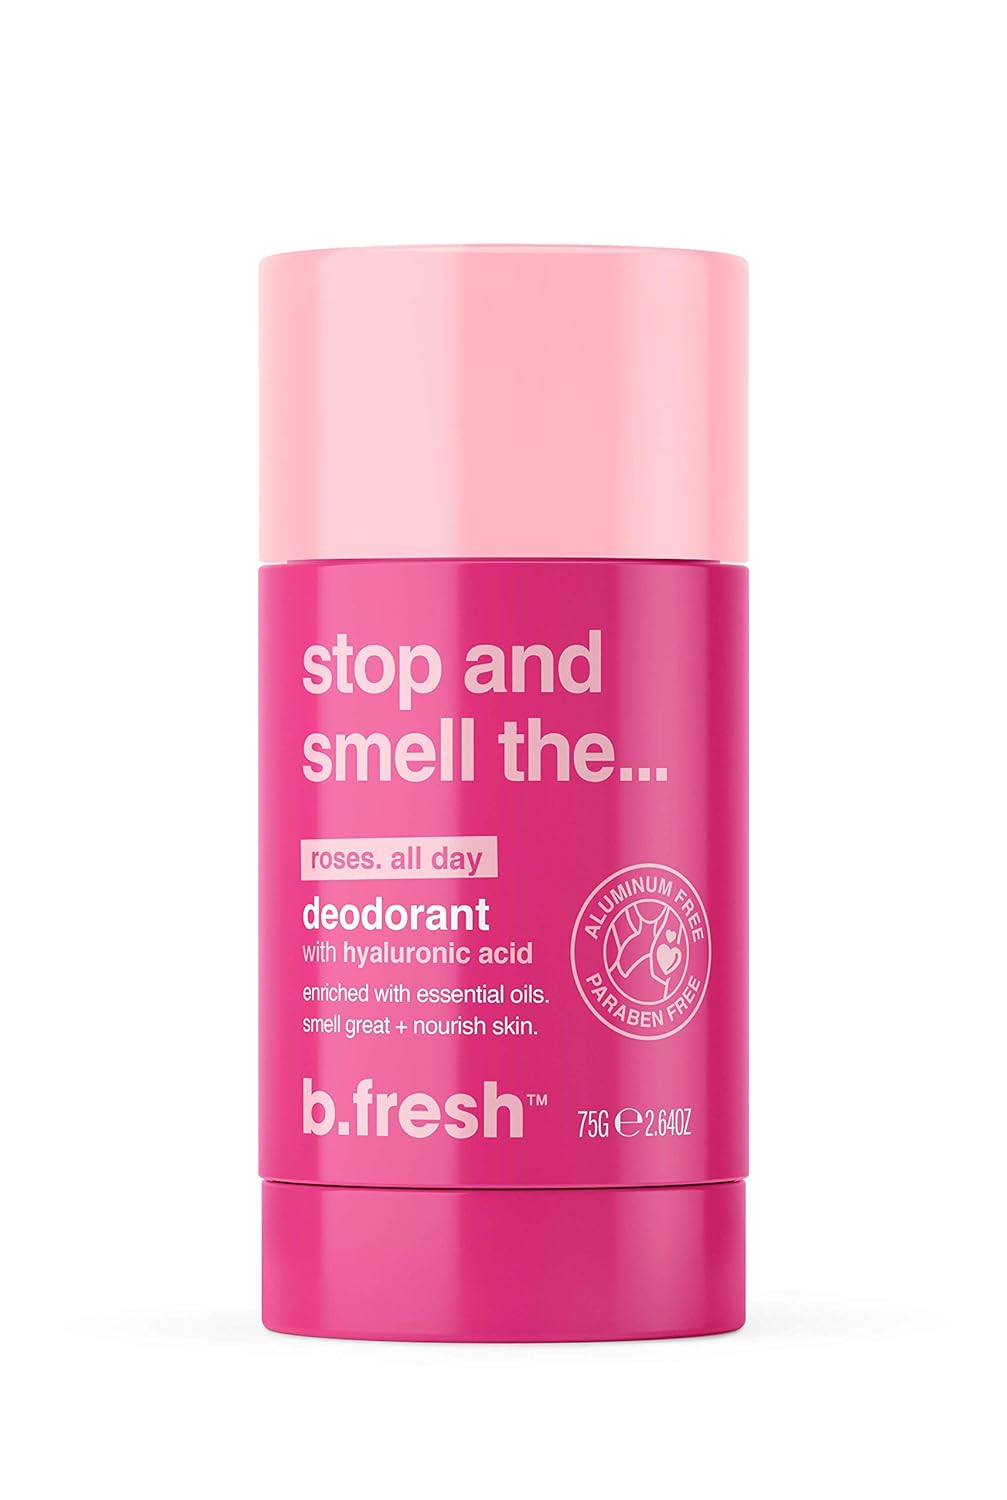 b.fresh Deodorant with Hyaluronic acid, Roses All Day